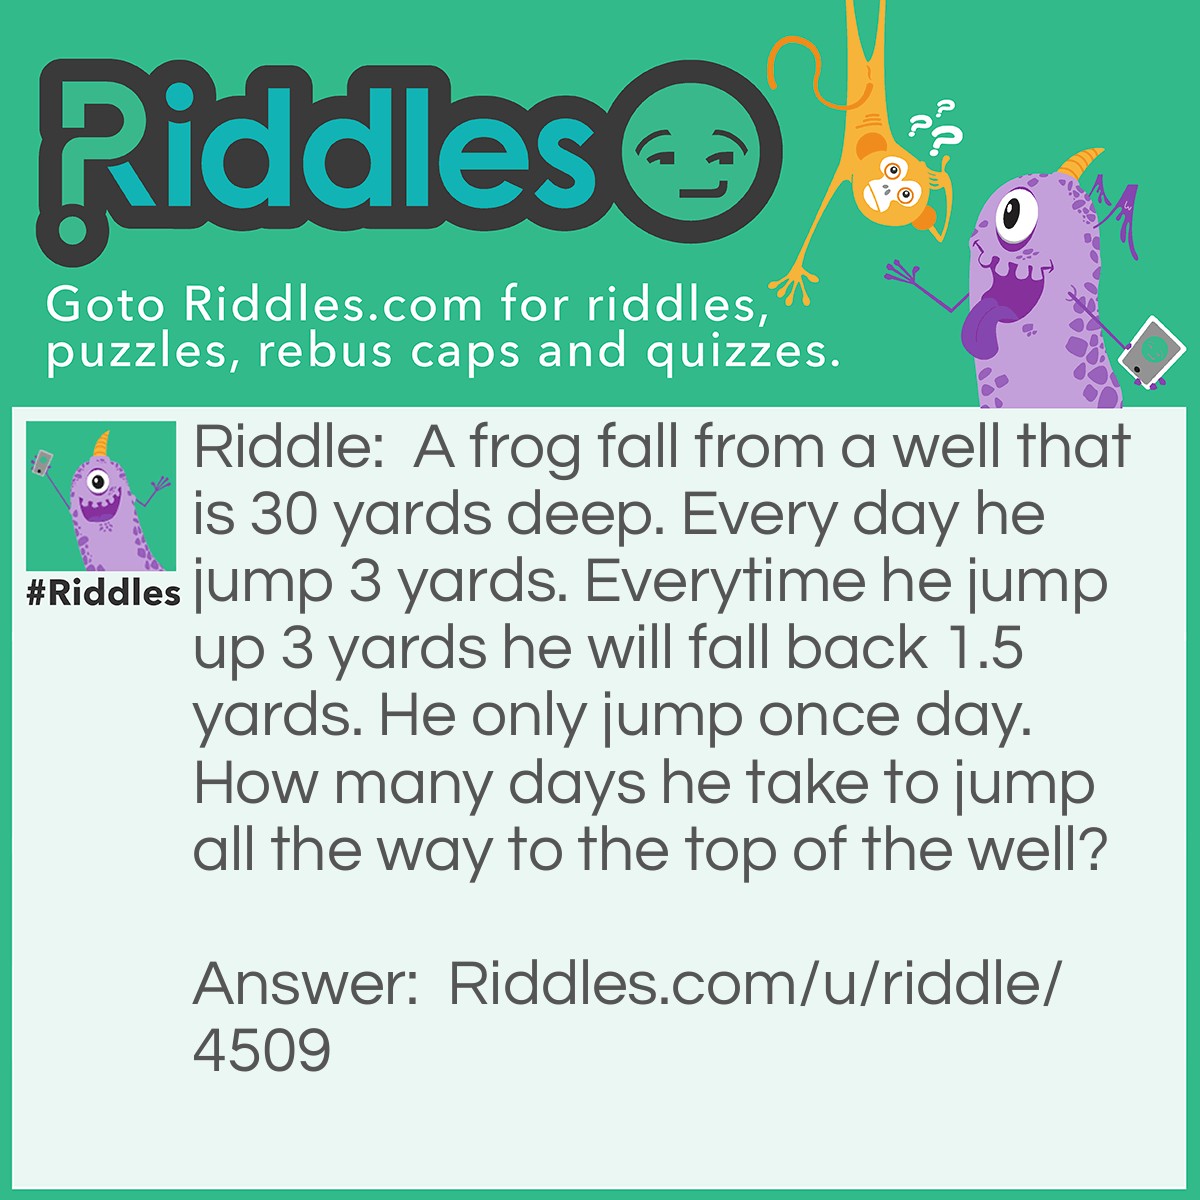 Riddle: A frog fall from a well that is 30 yards deep. Every day he jump 3 yards. Everytime he jump up 3 yards he will fall back 1.5 yards. He only jump once day. How many days he take to jump all the way to the top of the well? Answer: It is 30 yard! The frog will be already dead!